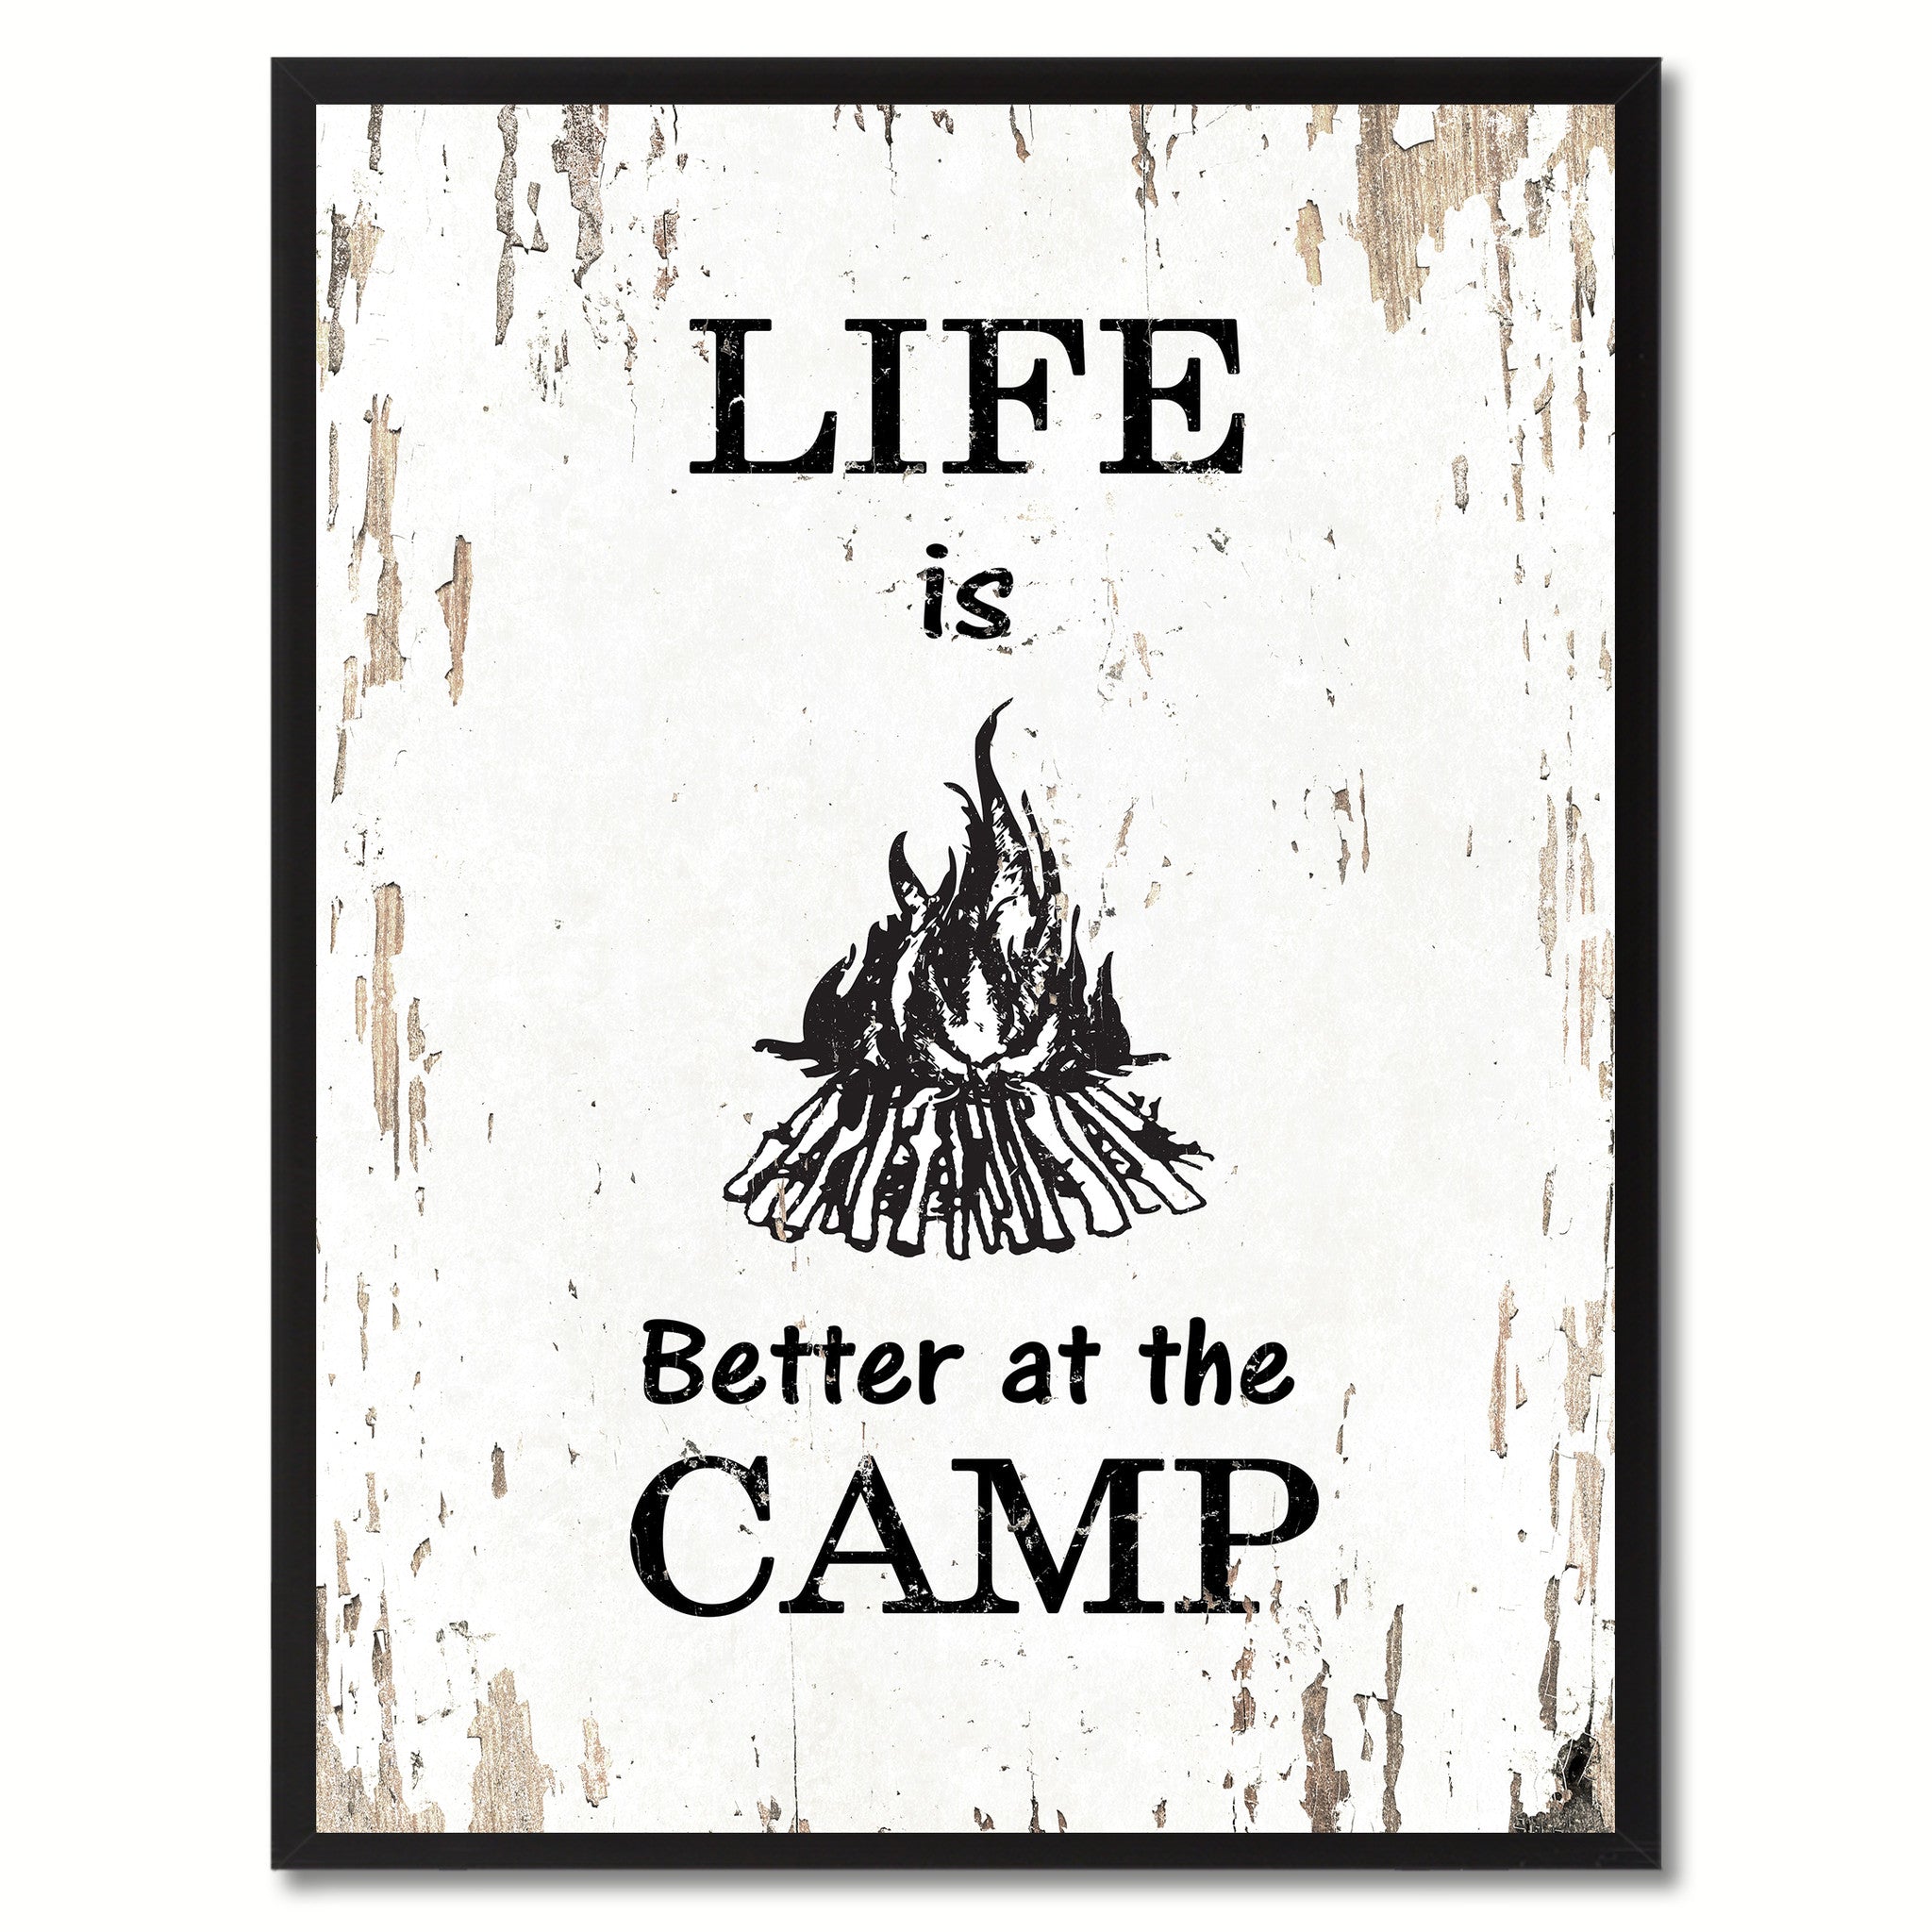 Life Is Better At The Camp Saying Canvas Print, Black Picture Frame Home Decor Wall Art Gifts